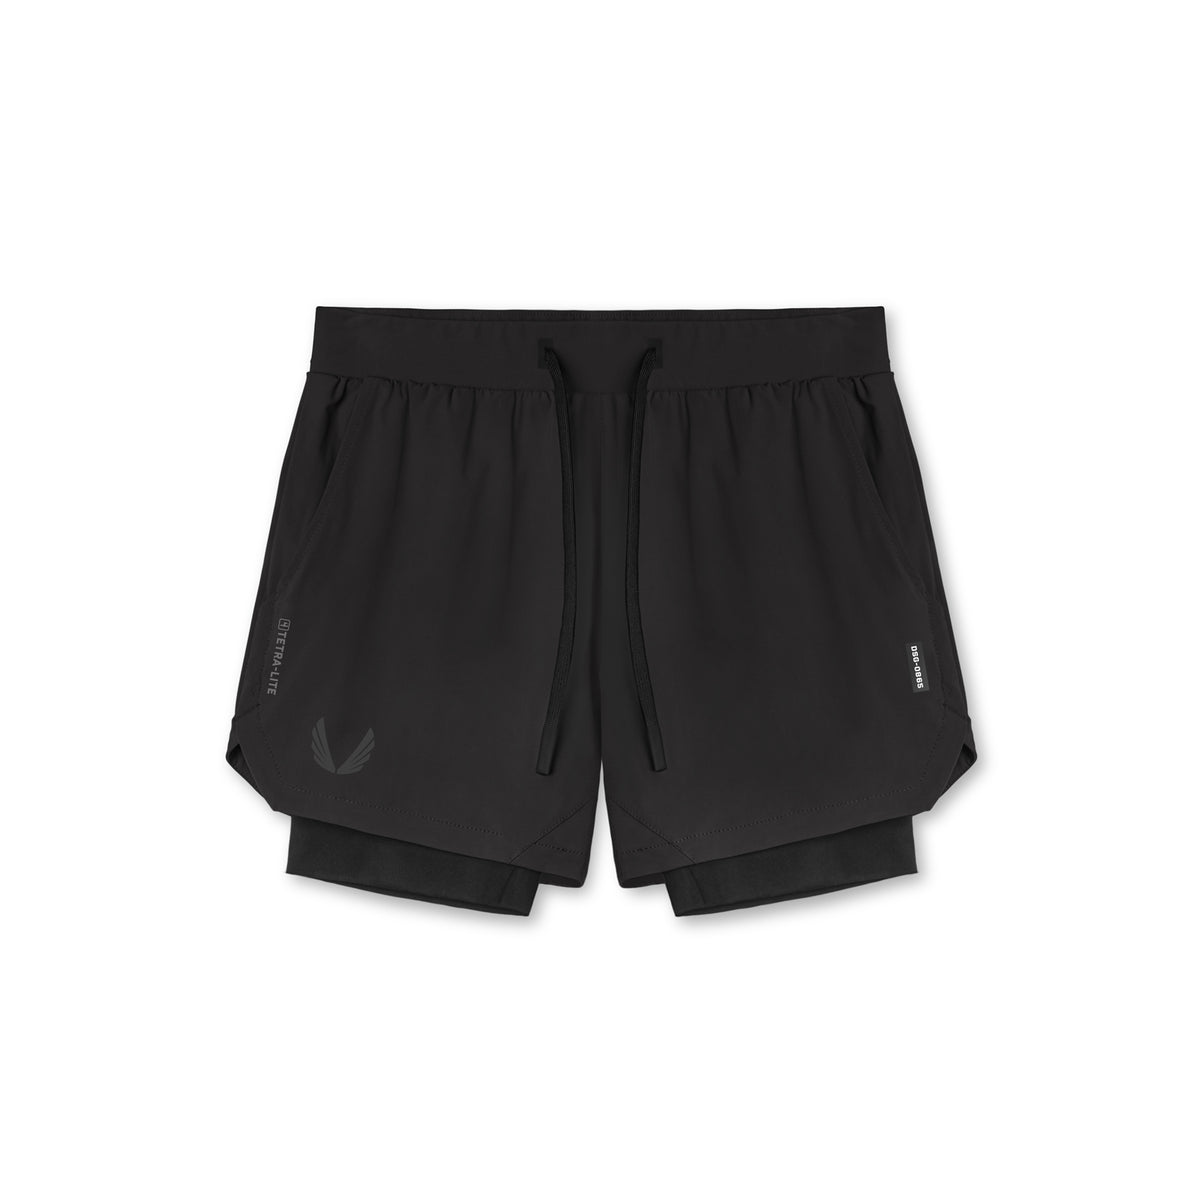 ASRV Tetra-Lite Wings Shorts 5" - Lined